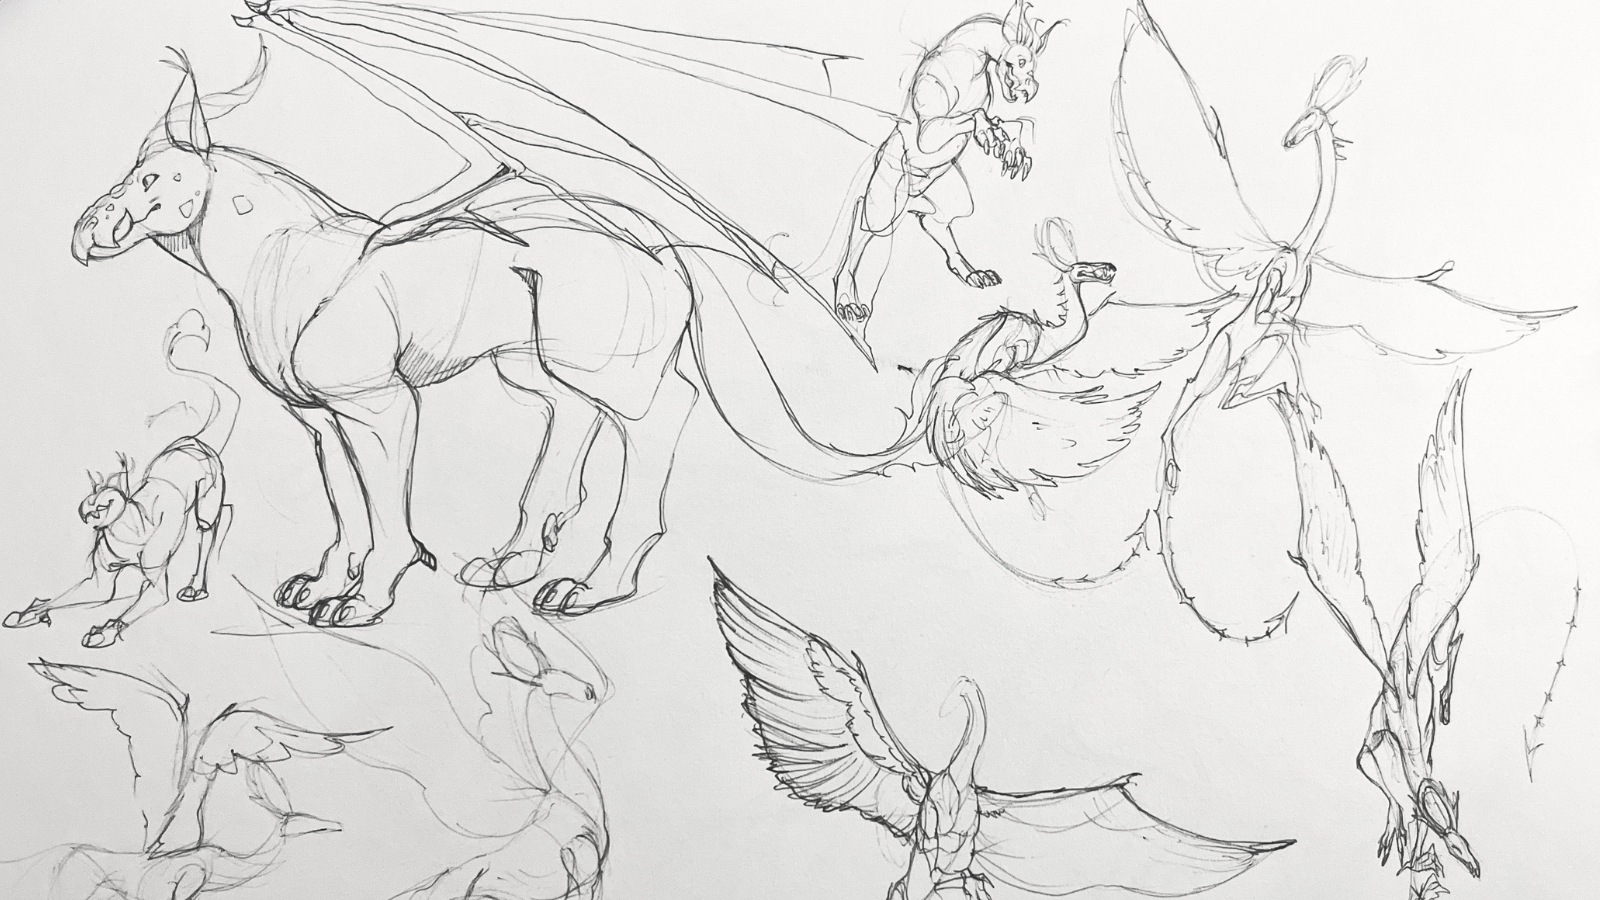 Dragon sketches on paper using pencil.